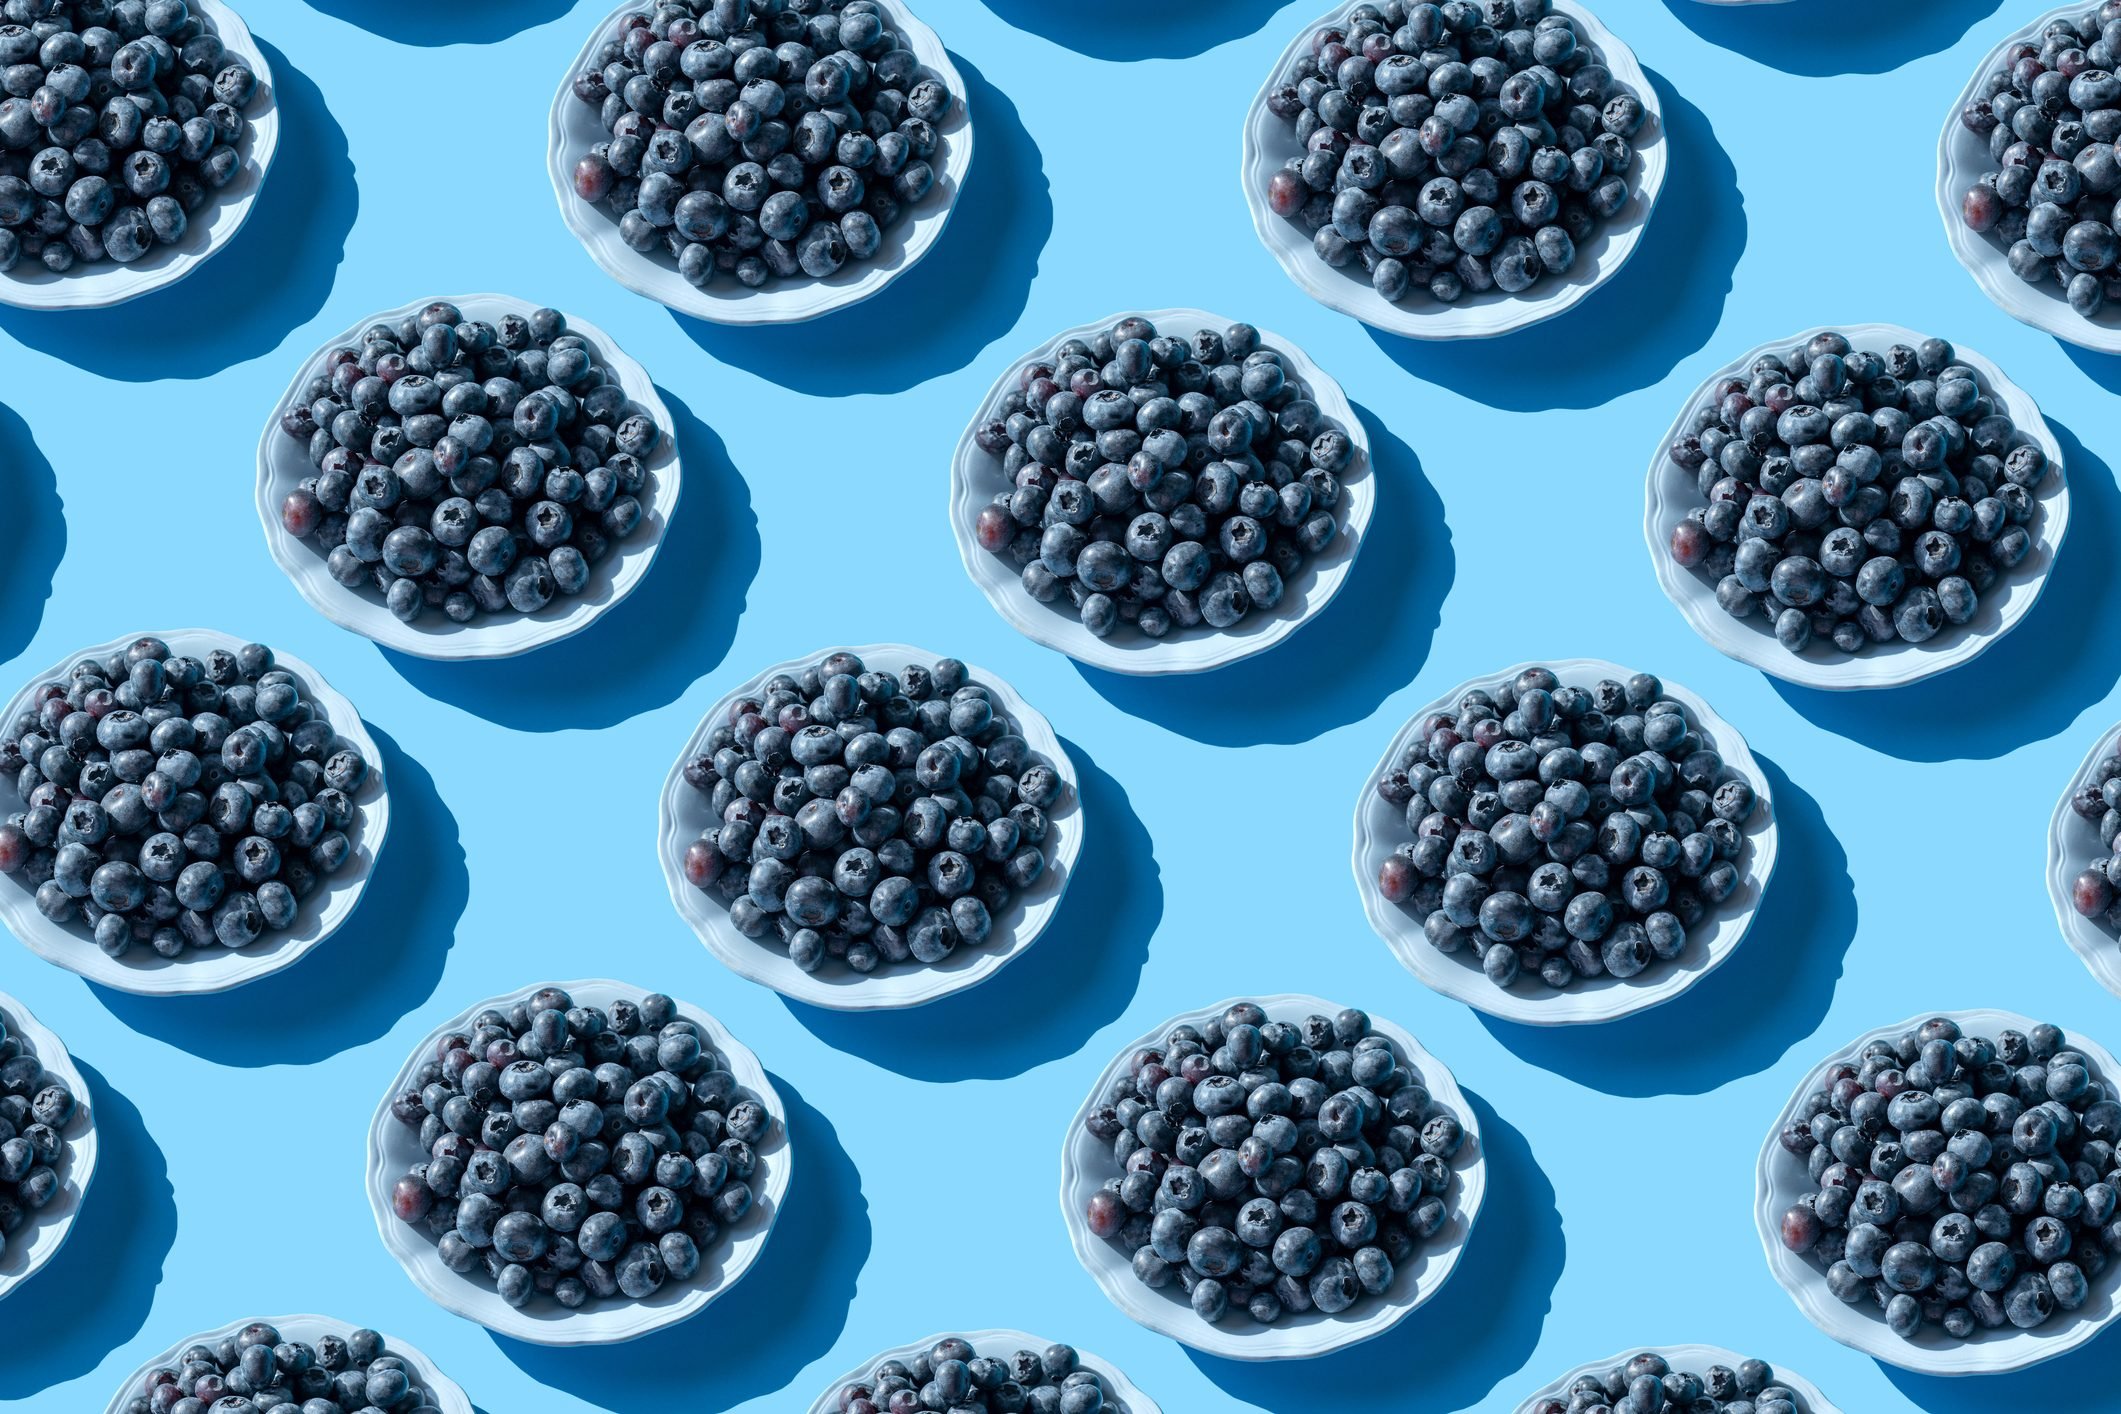 Are Blueberries Good for You? Their Nutrition, Calories, and Benefits